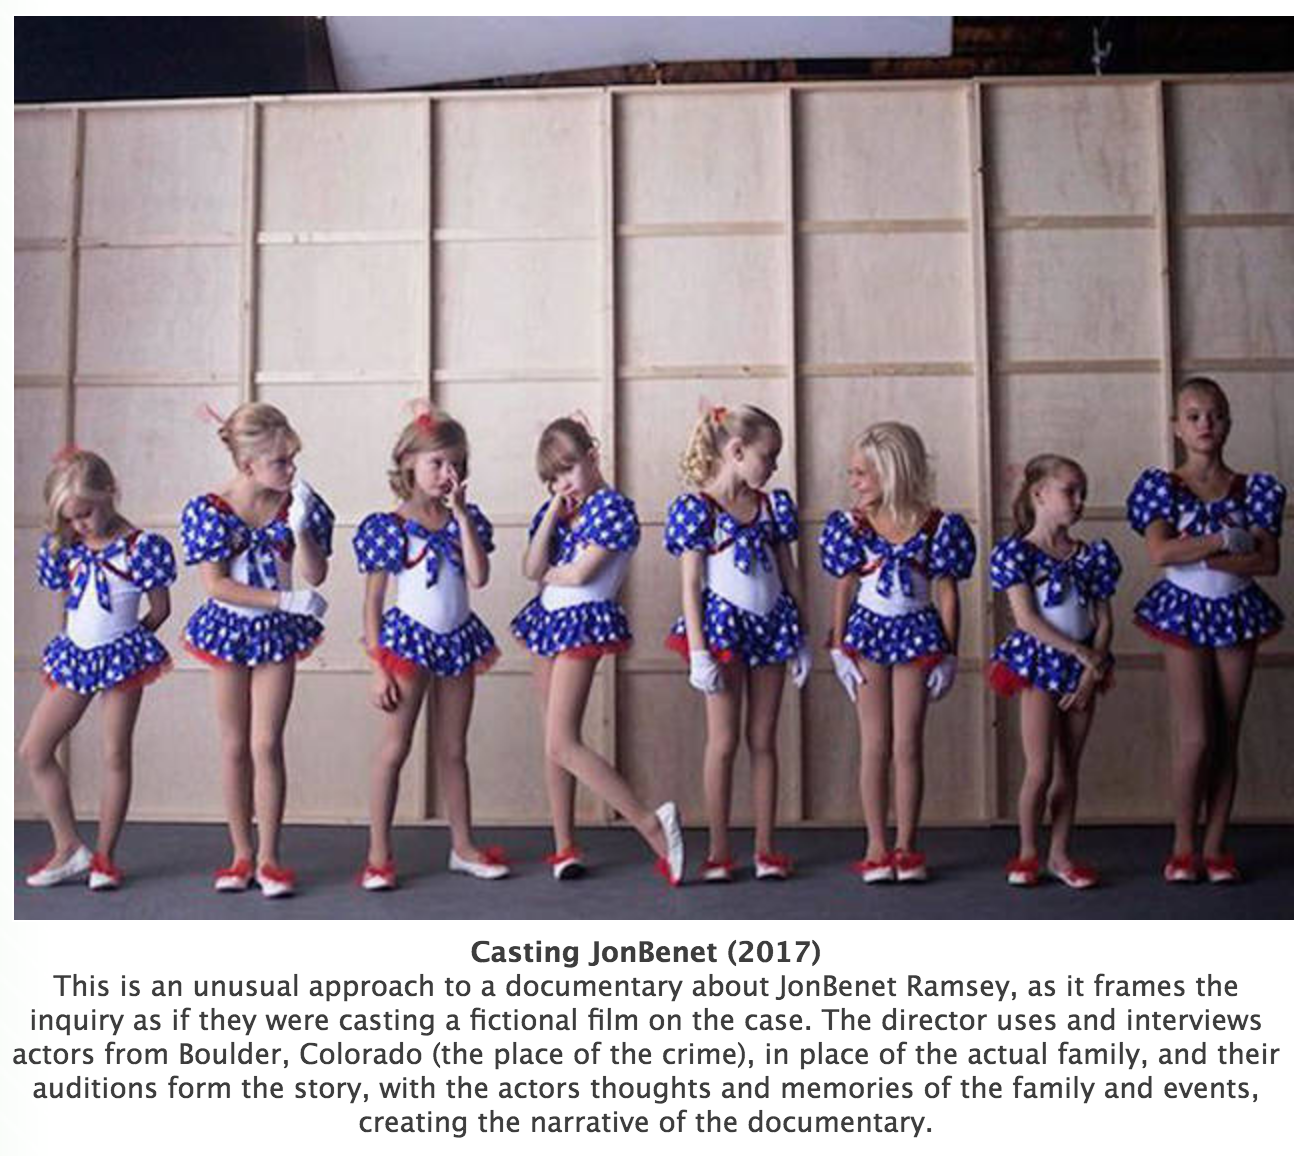 casting jonbenet - Casting JonBenet 2017 This is an unusual approach to a documentary about JonBenet Ramsey, as it frames the inquiry as if they were casting a fictional film on the case. The director uses and inte actors from Boulder, Colorado the place 